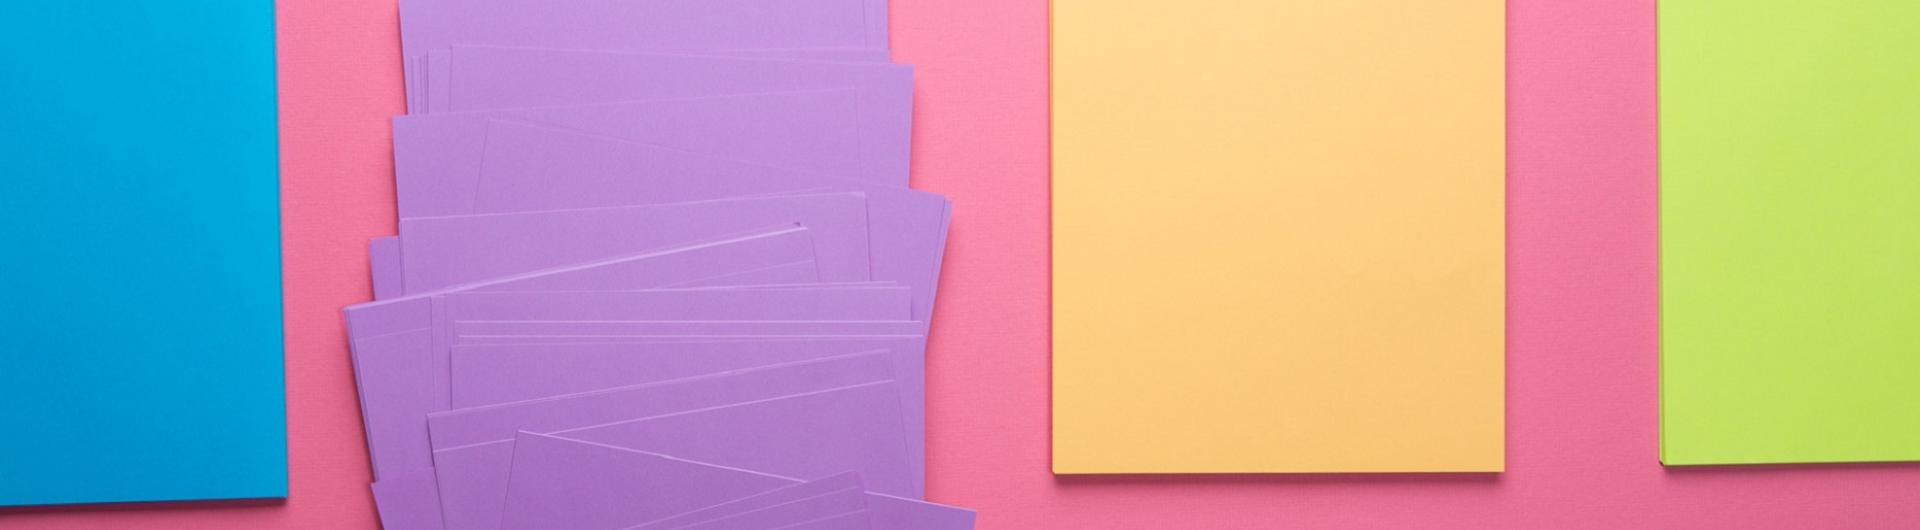 stacks of colored paper